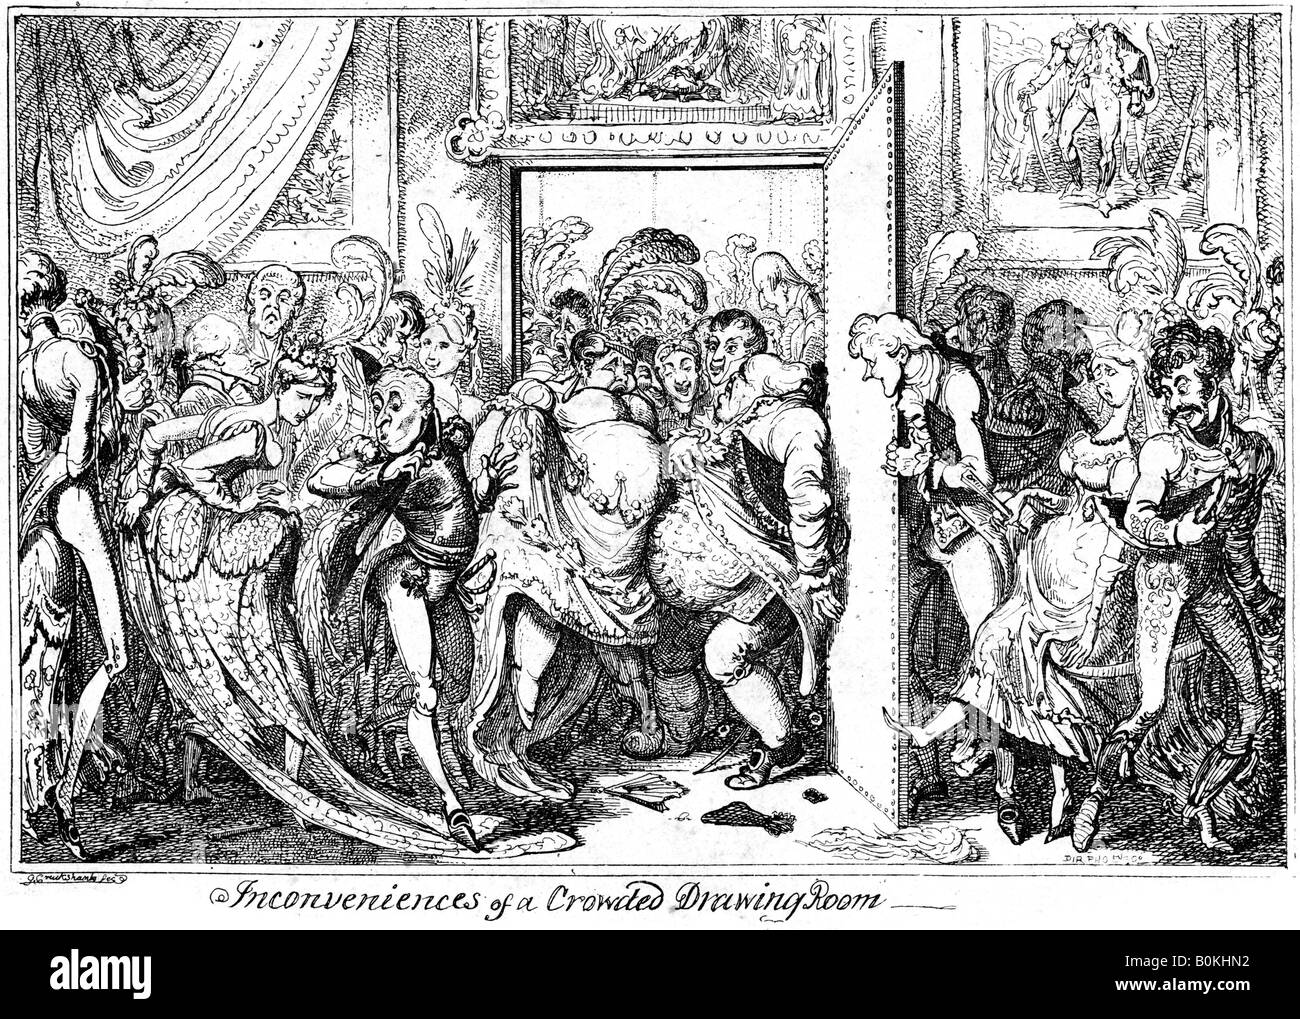 'Inconvenience of a Crowded Drawing Room', 1818.Artist: George Cruikshank Stock Photo